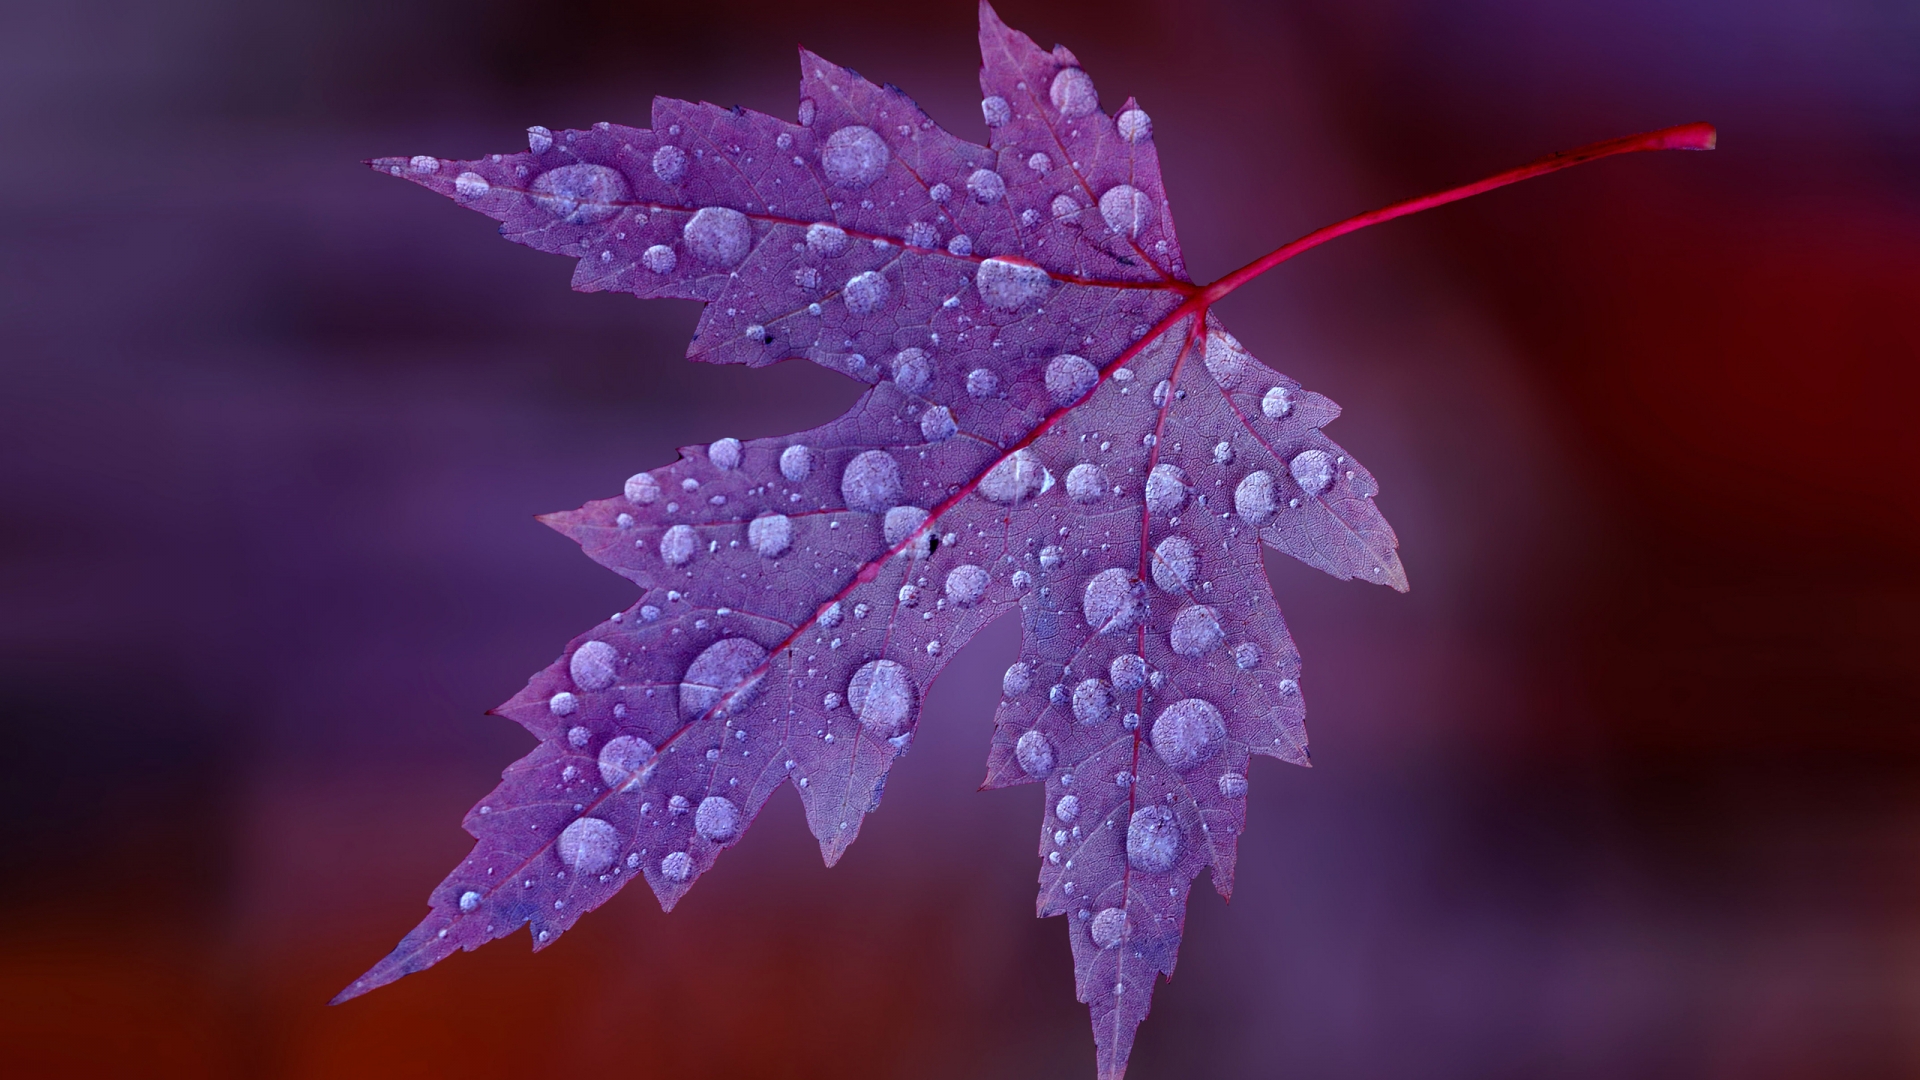 Water Drops on Purple Leaf  for 1920 x 1080 HDTV 1080p resolution